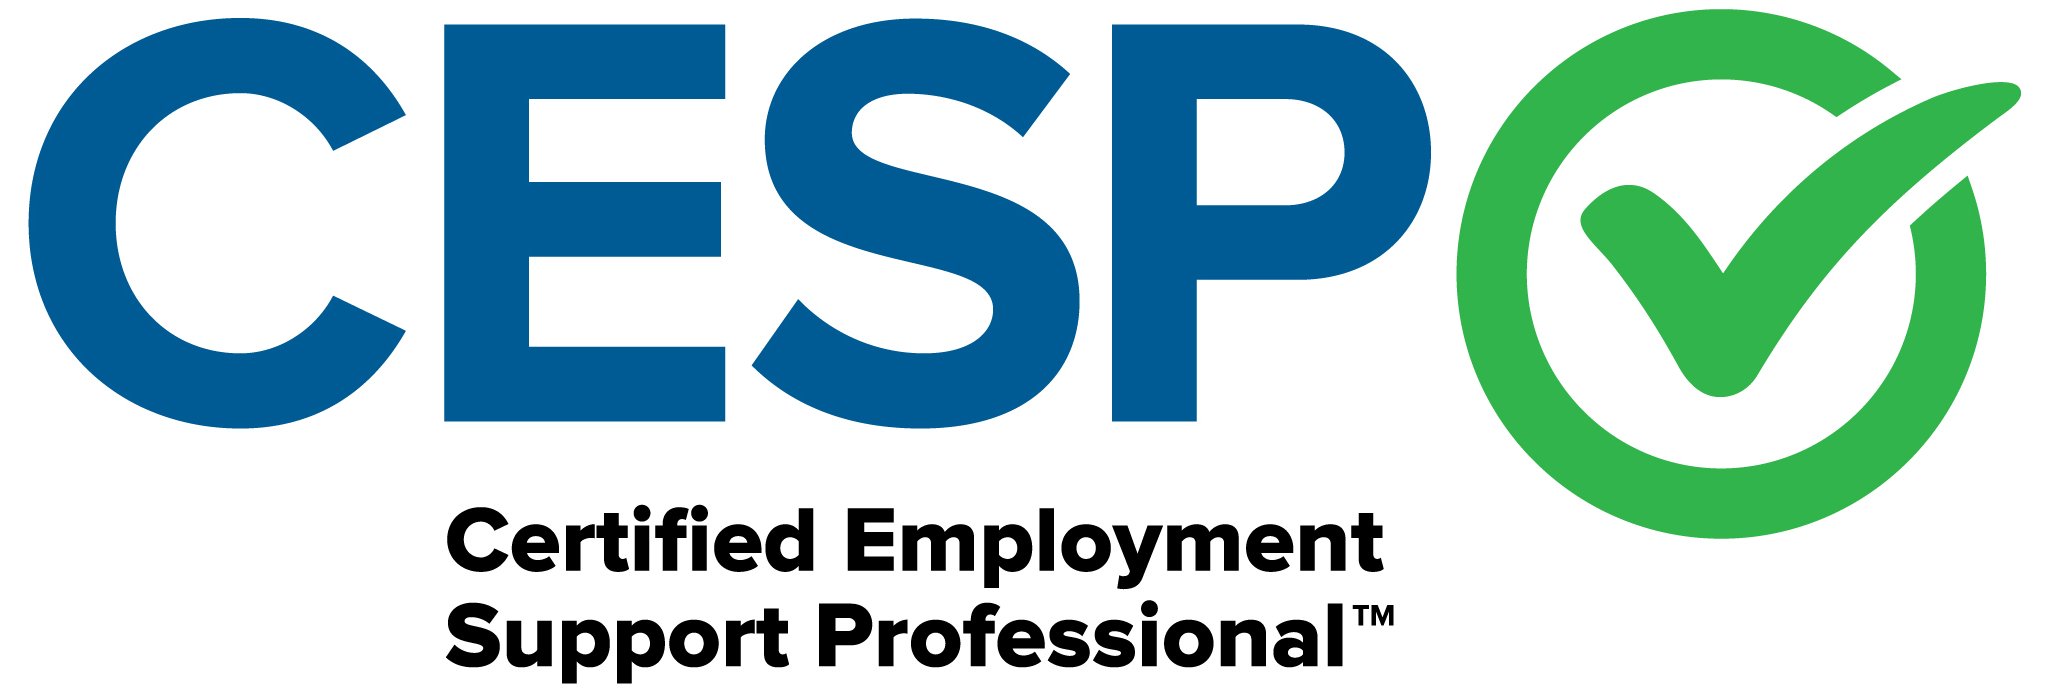 Certified Employment Support Professional